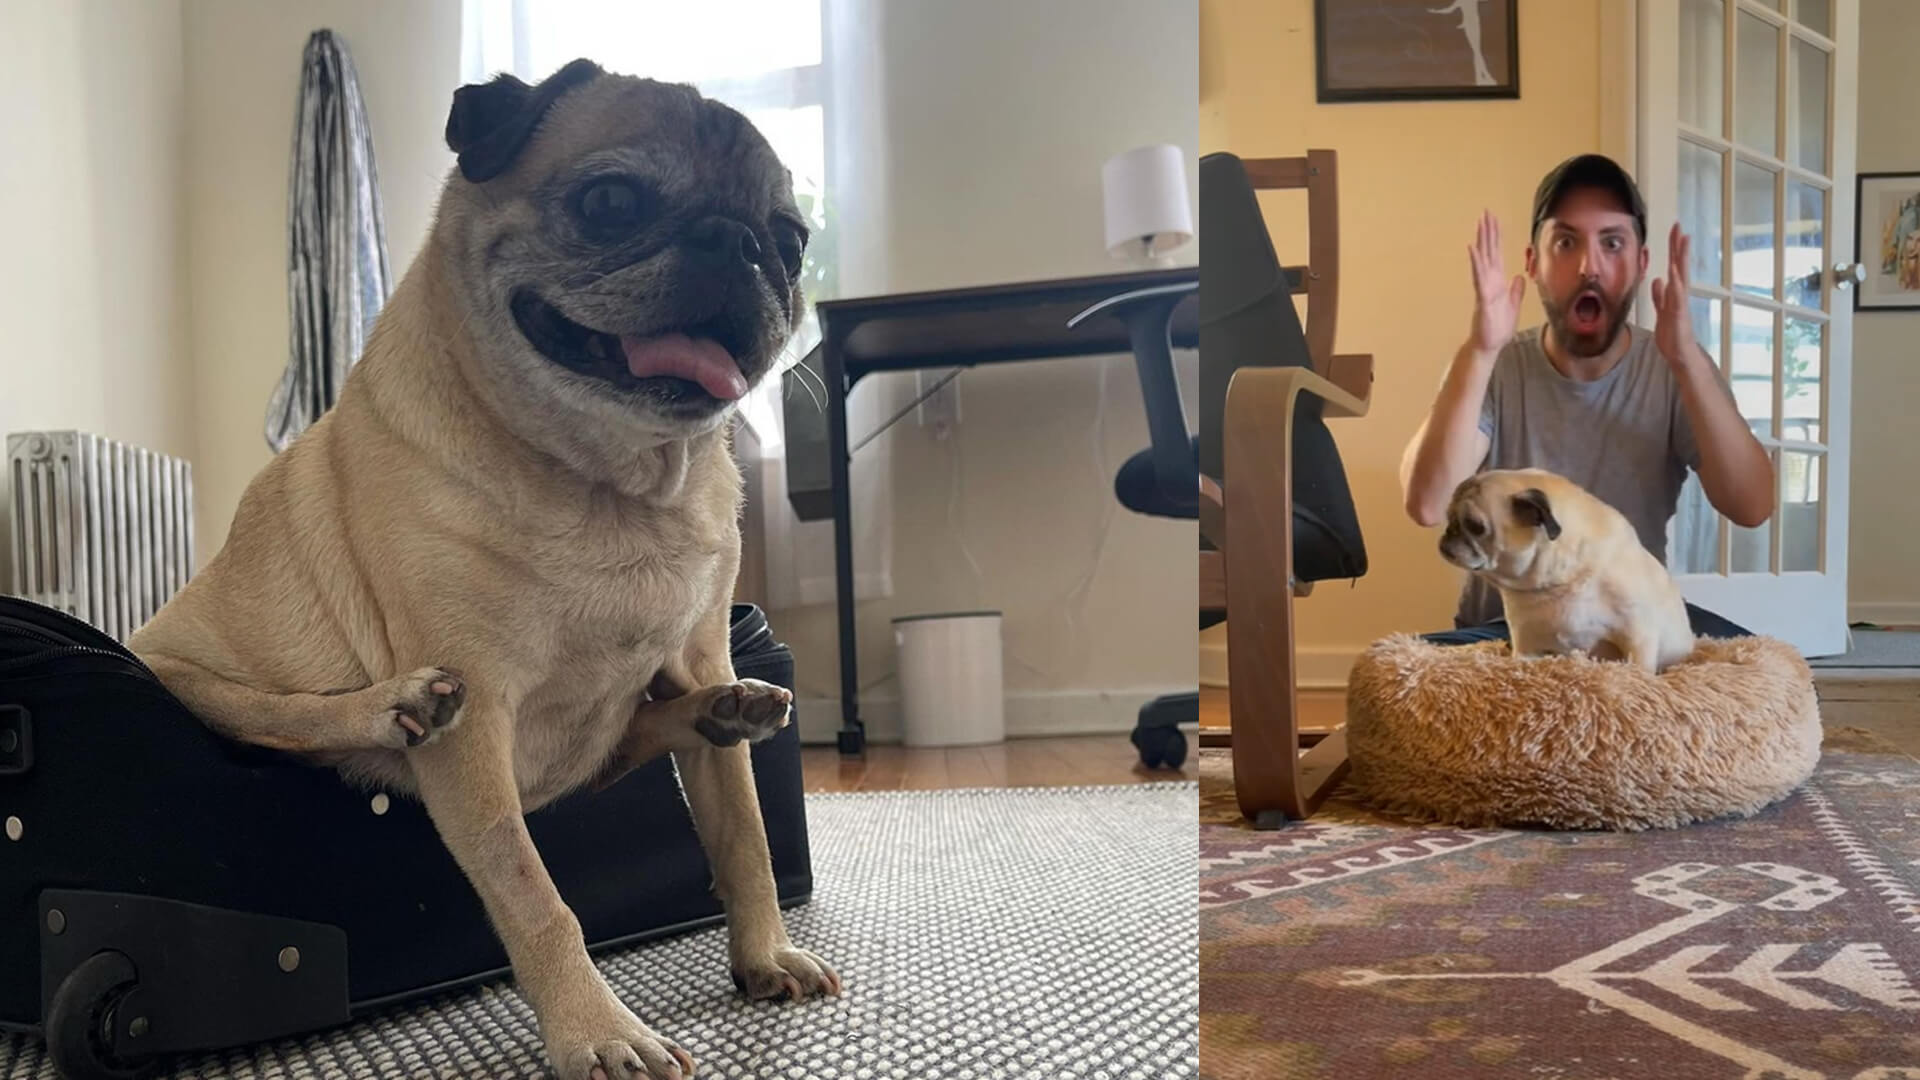 New York City pug breaks internet by predicting what kind of day we'll have  with daily bones or no bones ritual | amNewYork